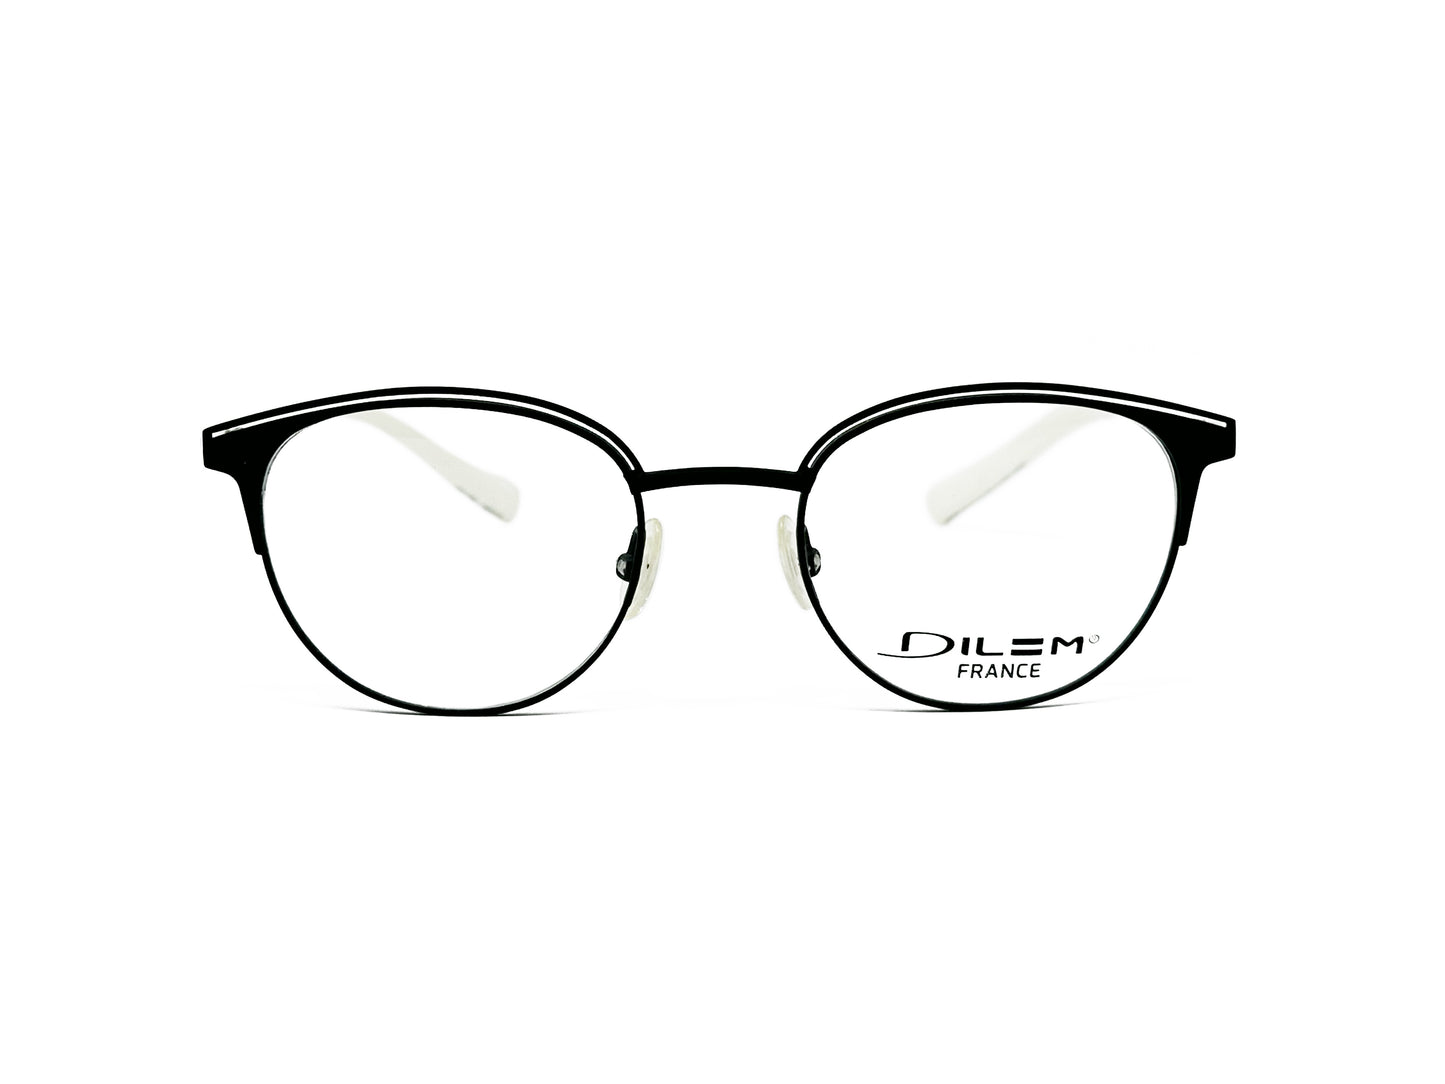 Dilem round optical frame with eing tips and slit cut-out at top of frame. Model: XF009. Color : TKB13 - Black with white temples. Front view. 